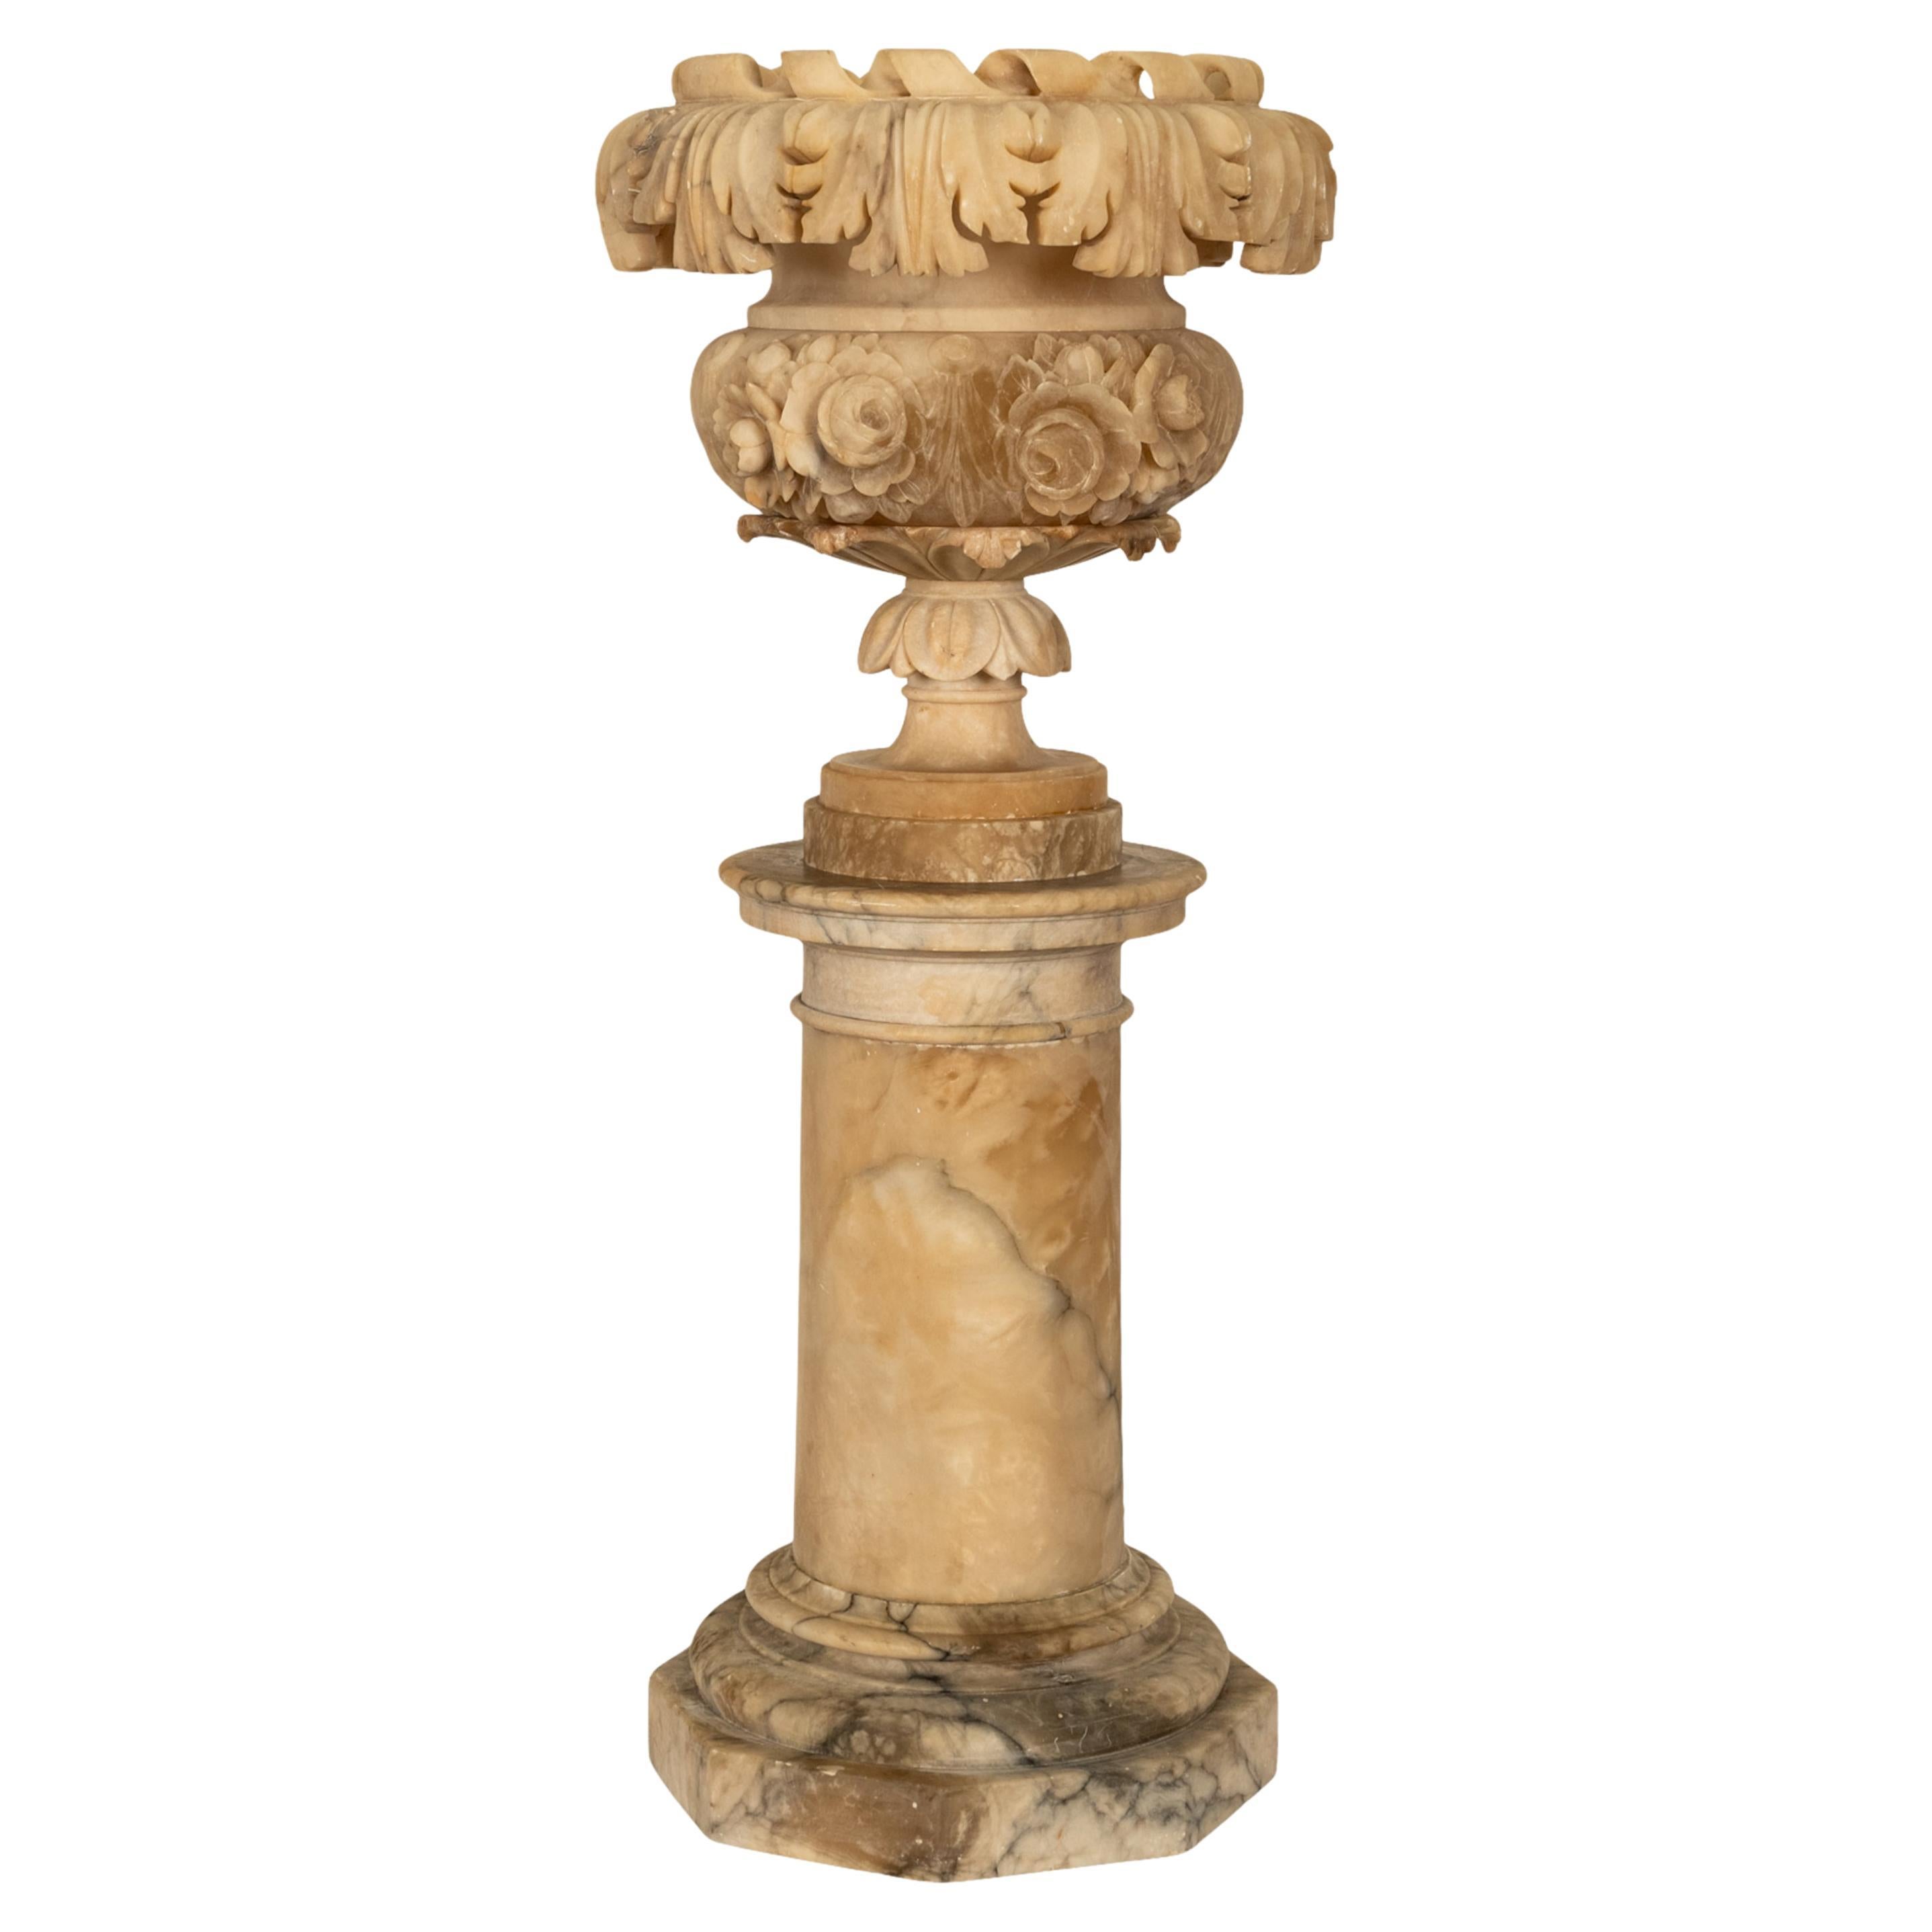 Antique 19th Century Italian Carved Alabaster Neoclassical Urn on Pedestal 1850 For Sale